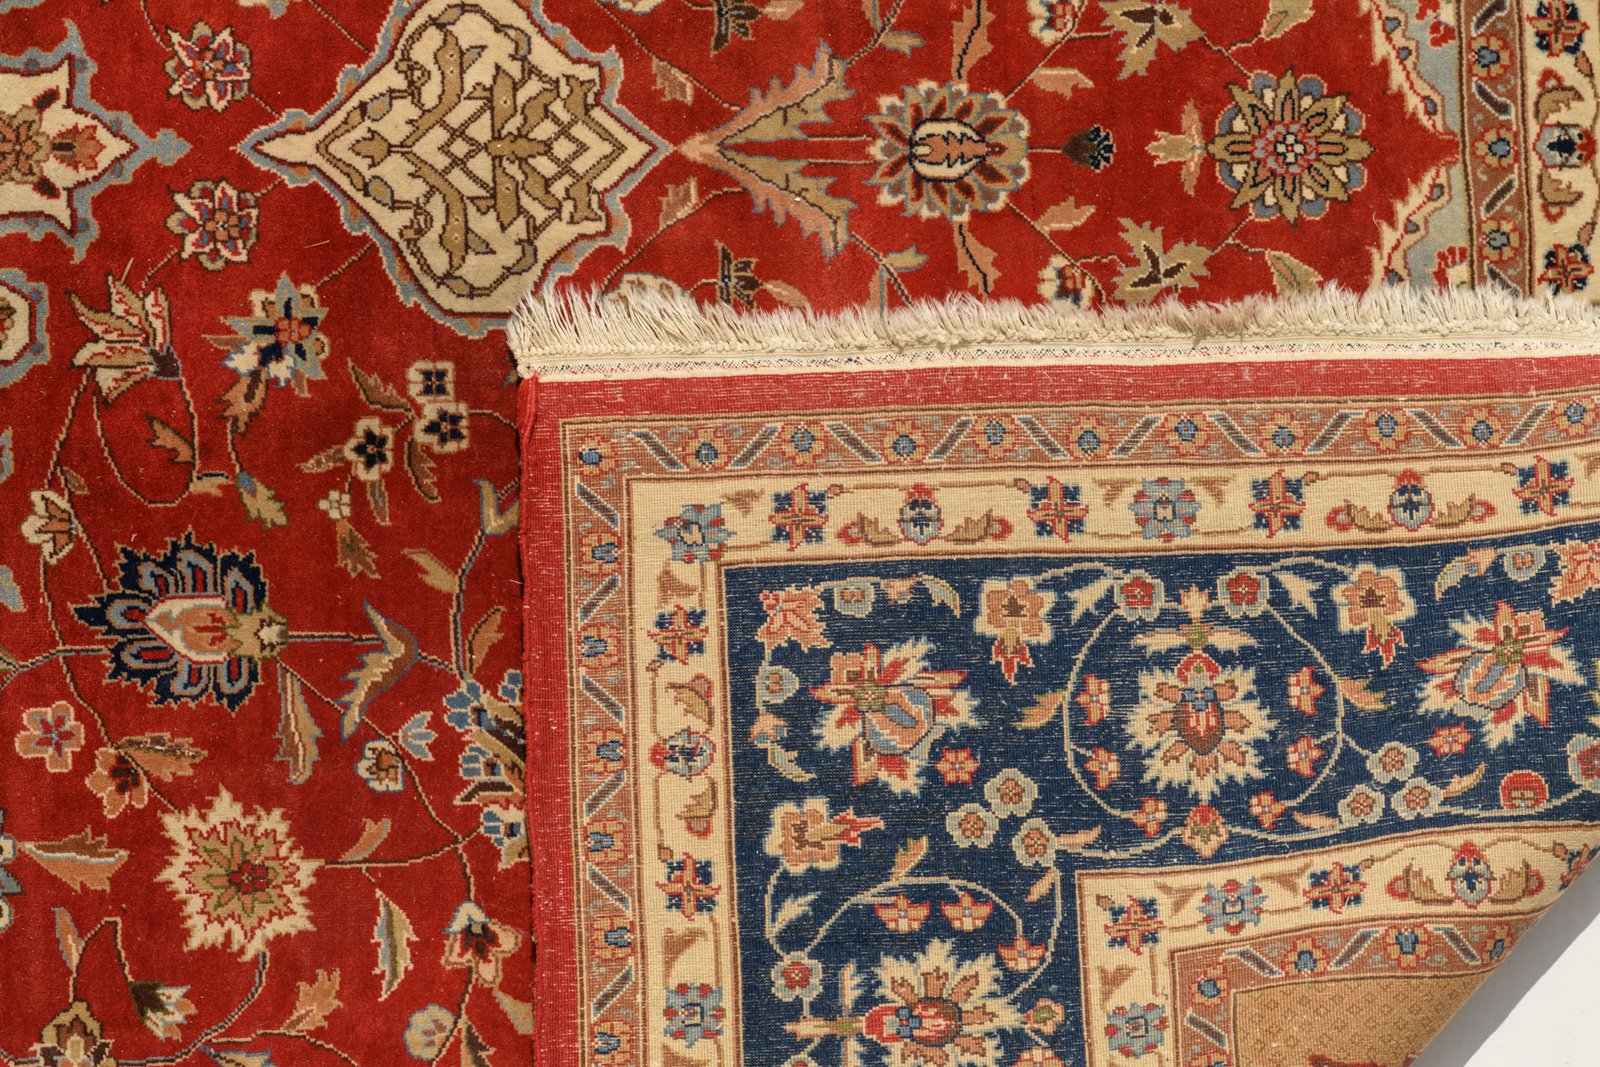 An Oriental woollen rug, floral decorated, with a central medallion, 252 x 350 cm - Image 3 of 3